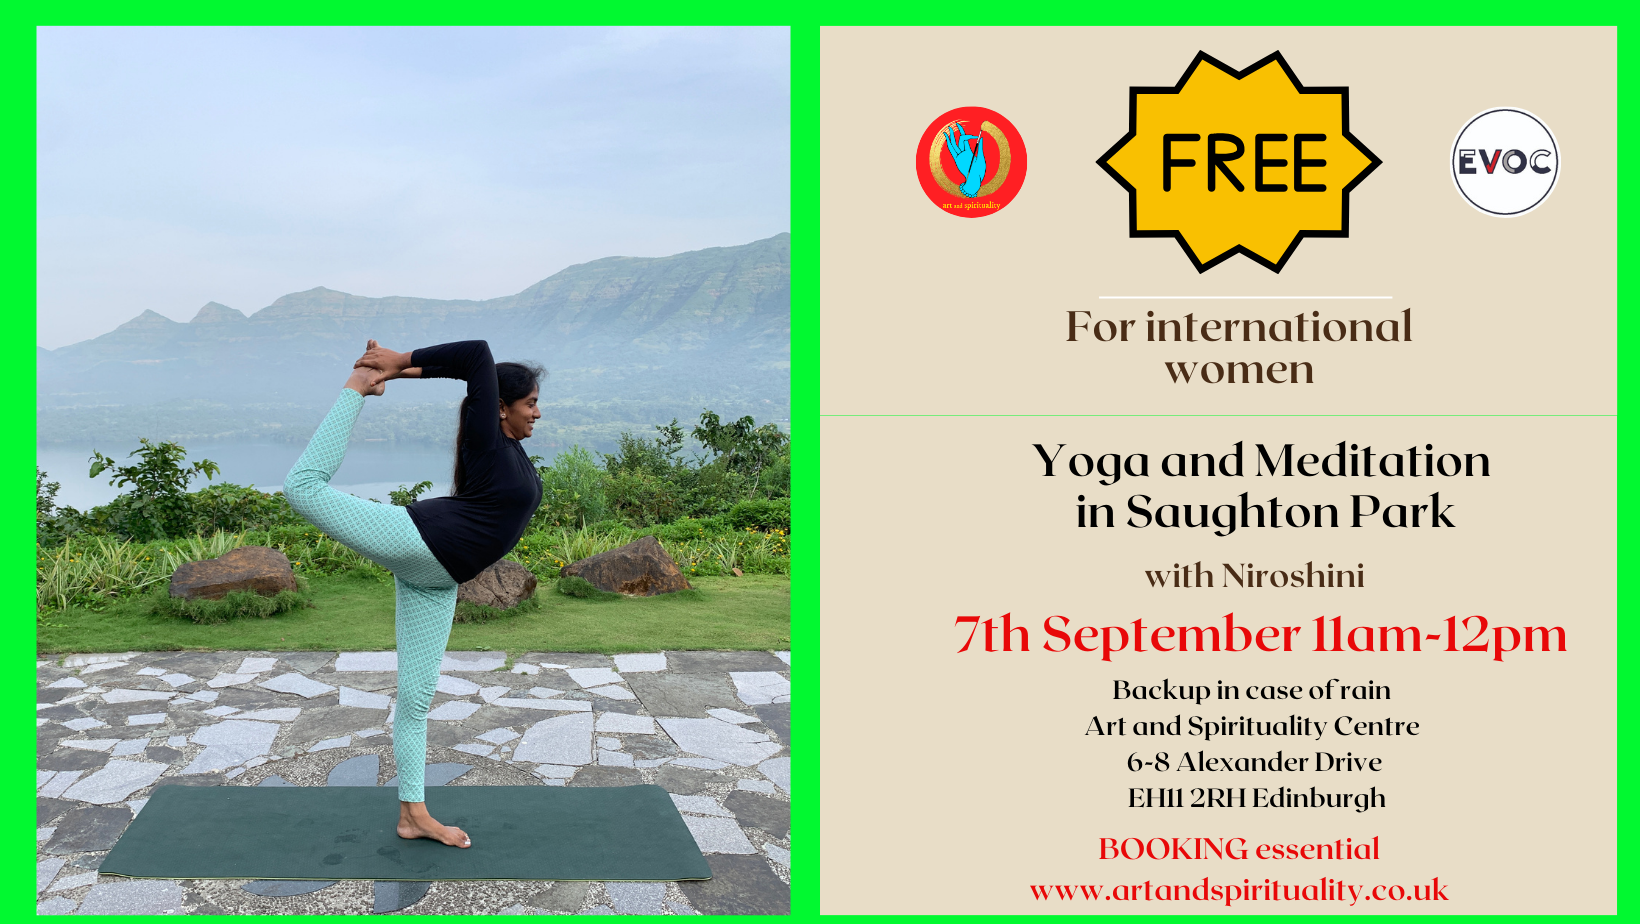 7th September: FREE YOGA AND MEDITATION in the park for international women (copy)